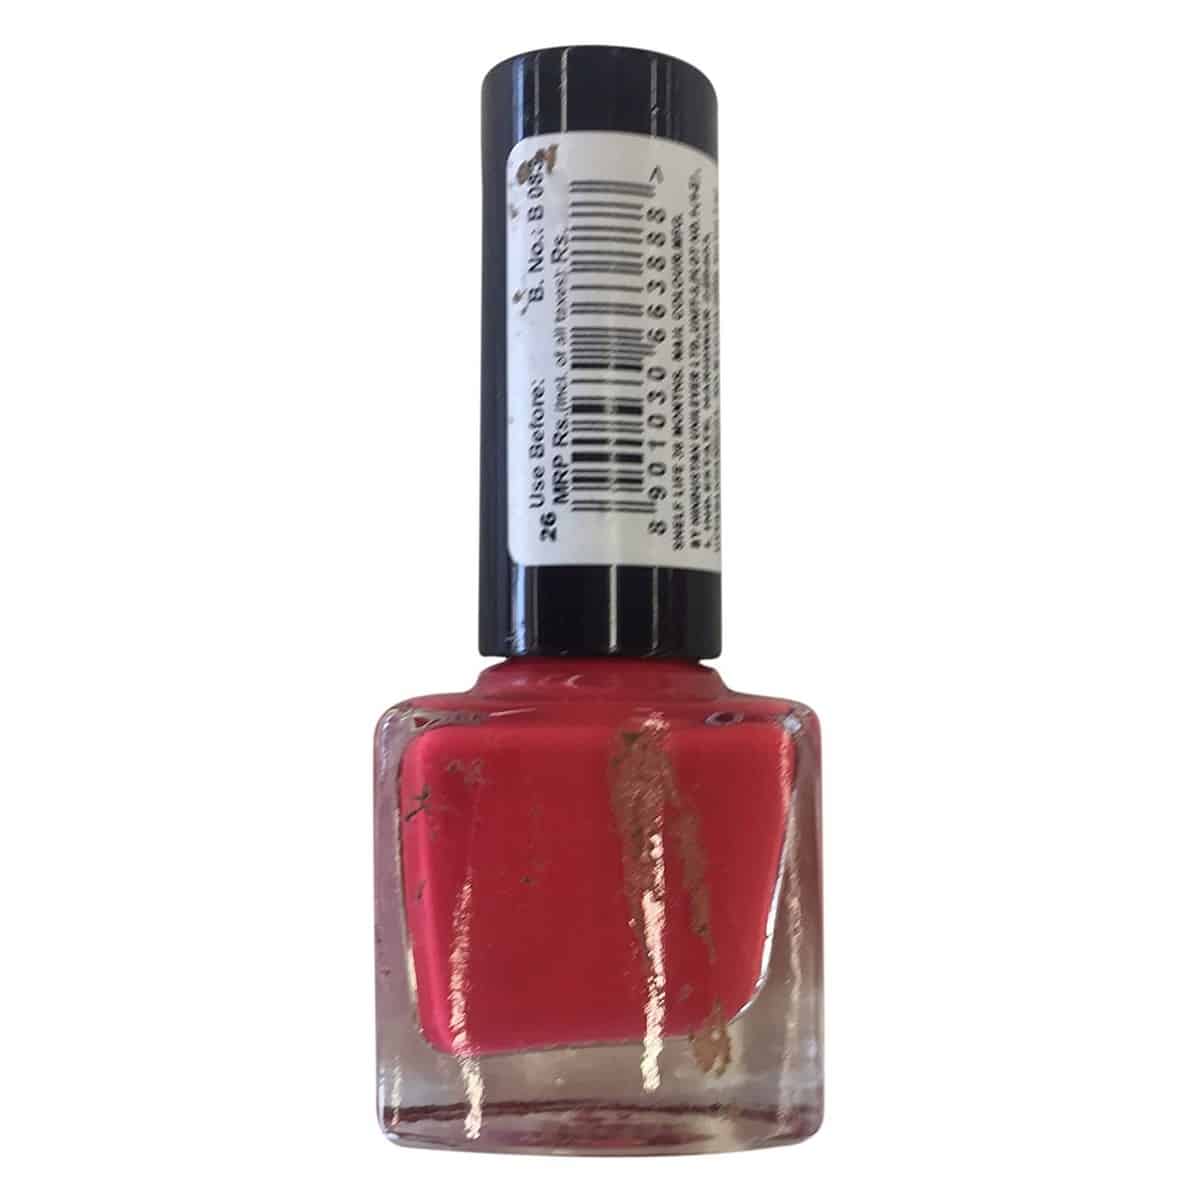 Buy Elle18 Nail Pops Nail Color 168, 168, 5 ml Online at Low Prices in  India - Amazon.in